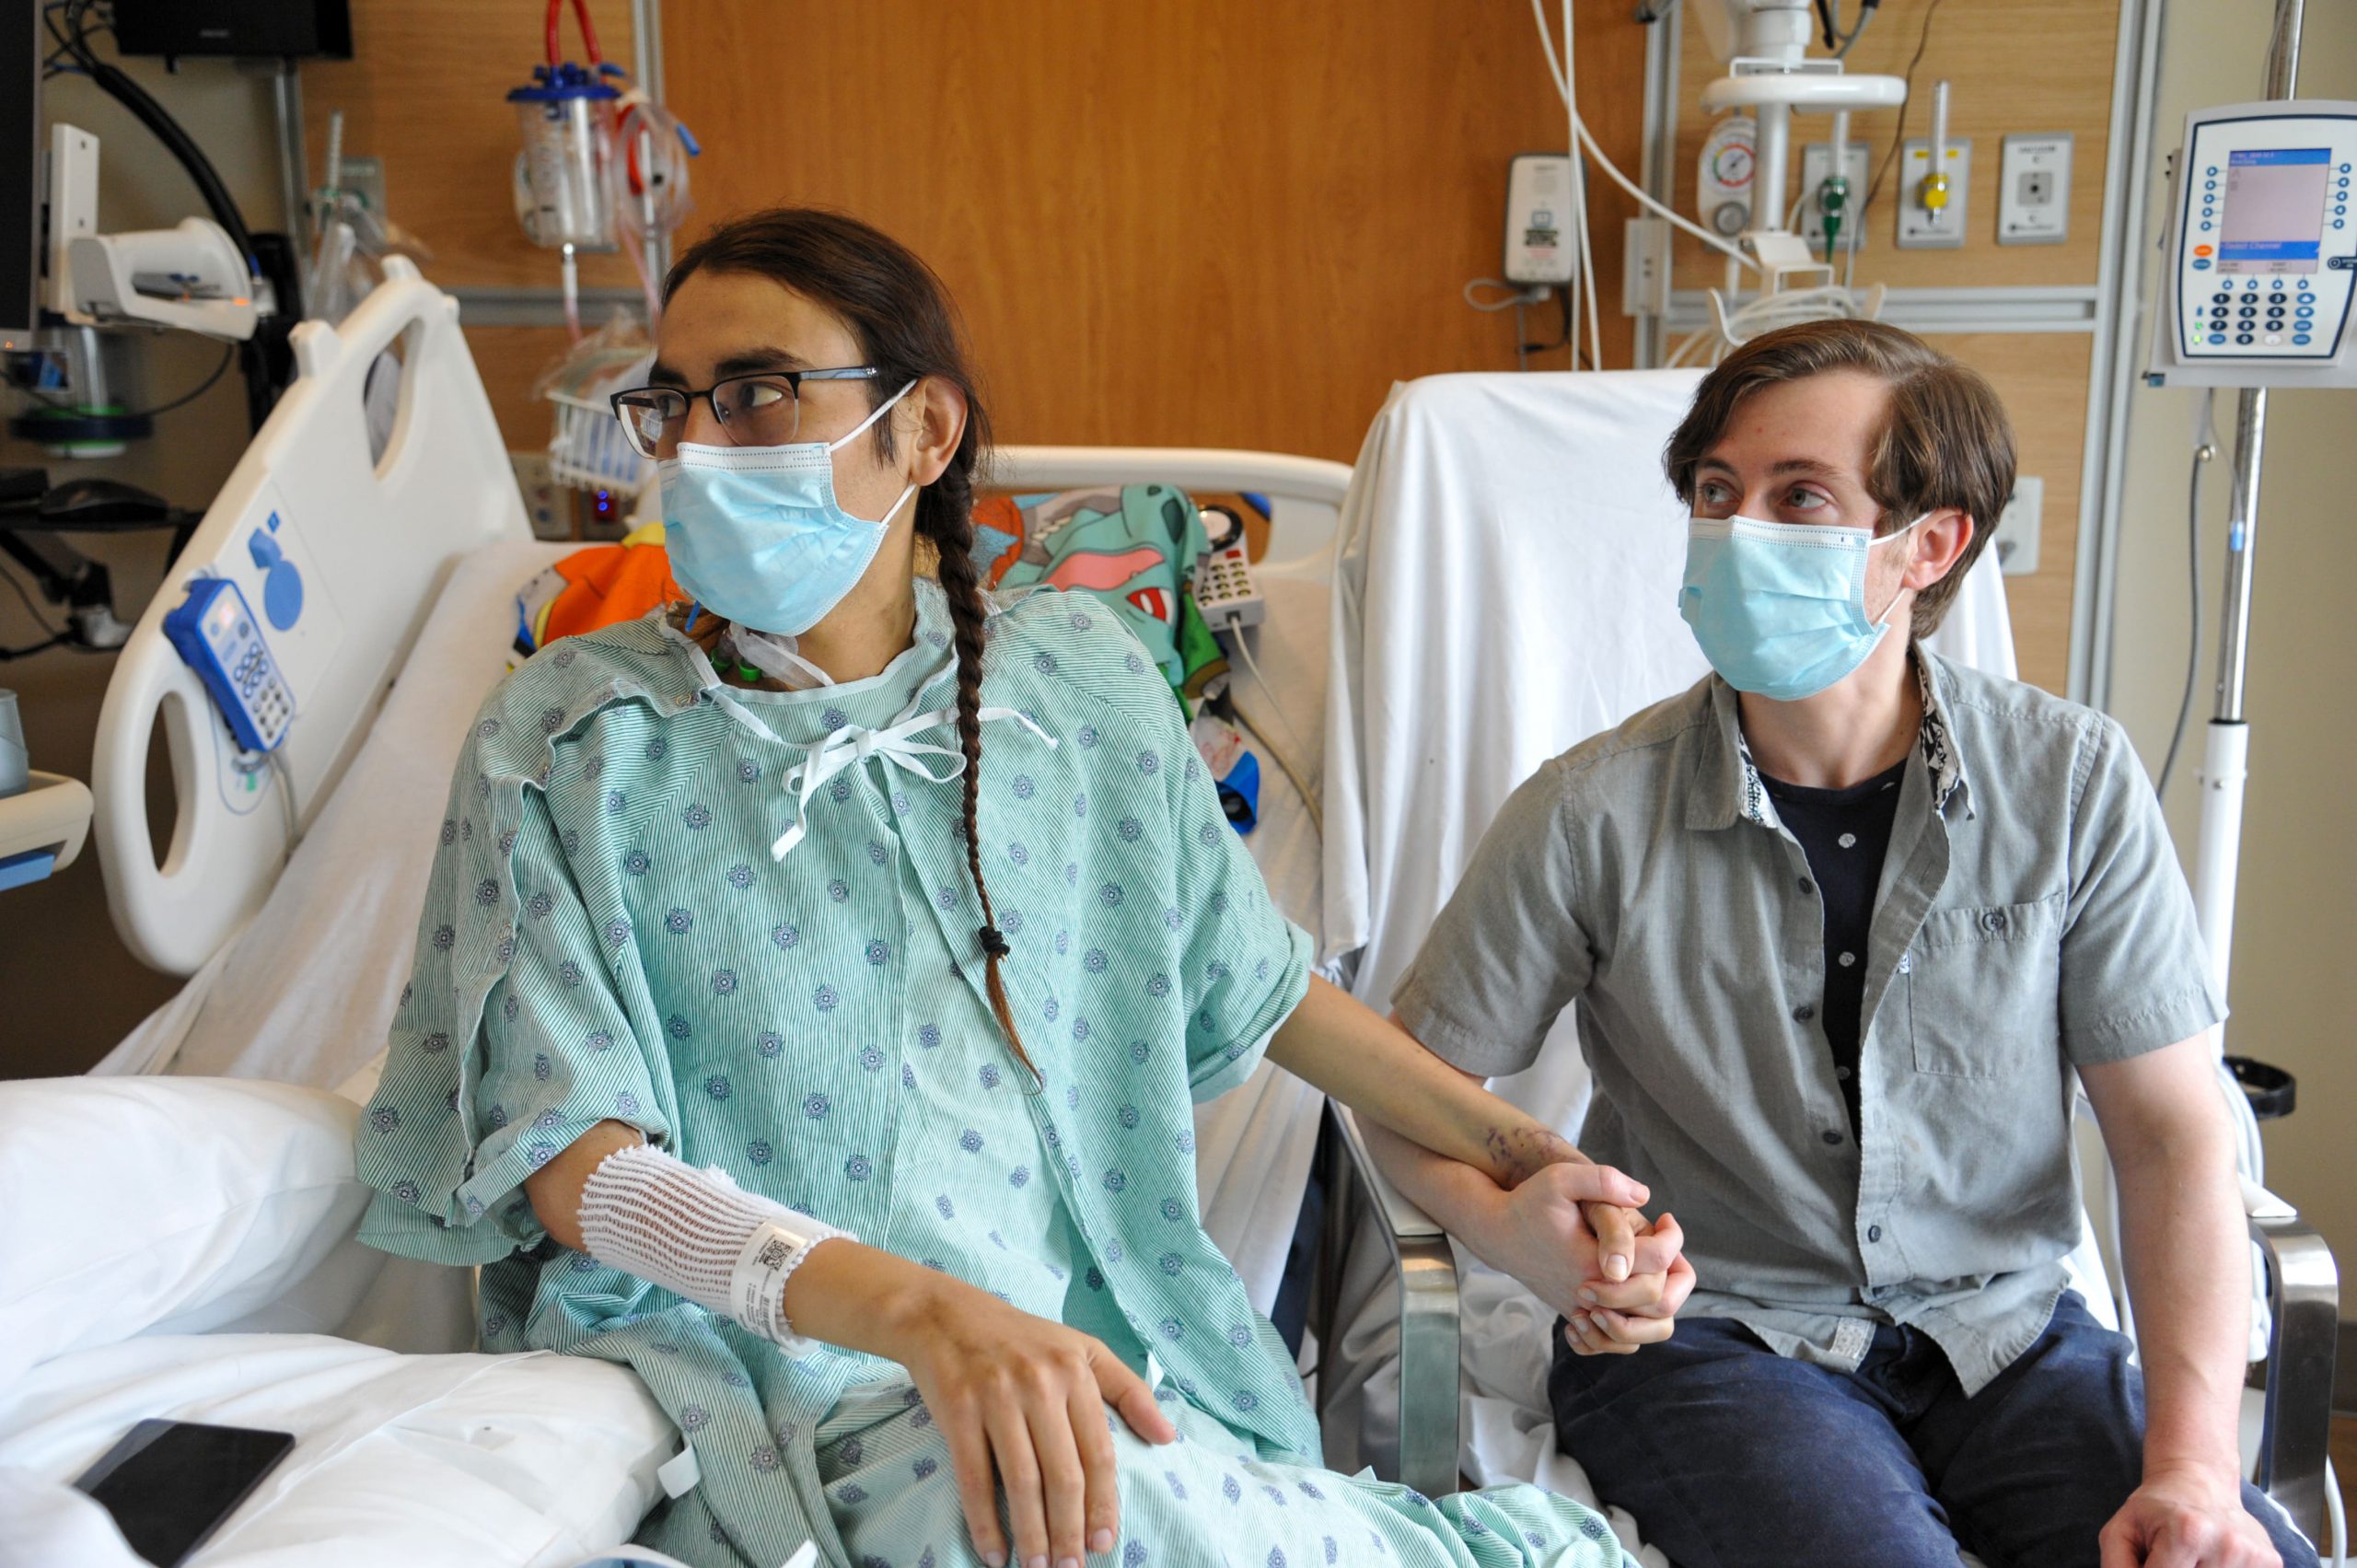 Bradley Ganoe with husband Alex Ganoe in Bradley's patient recovery room after his liver transplant surgery at CPMC